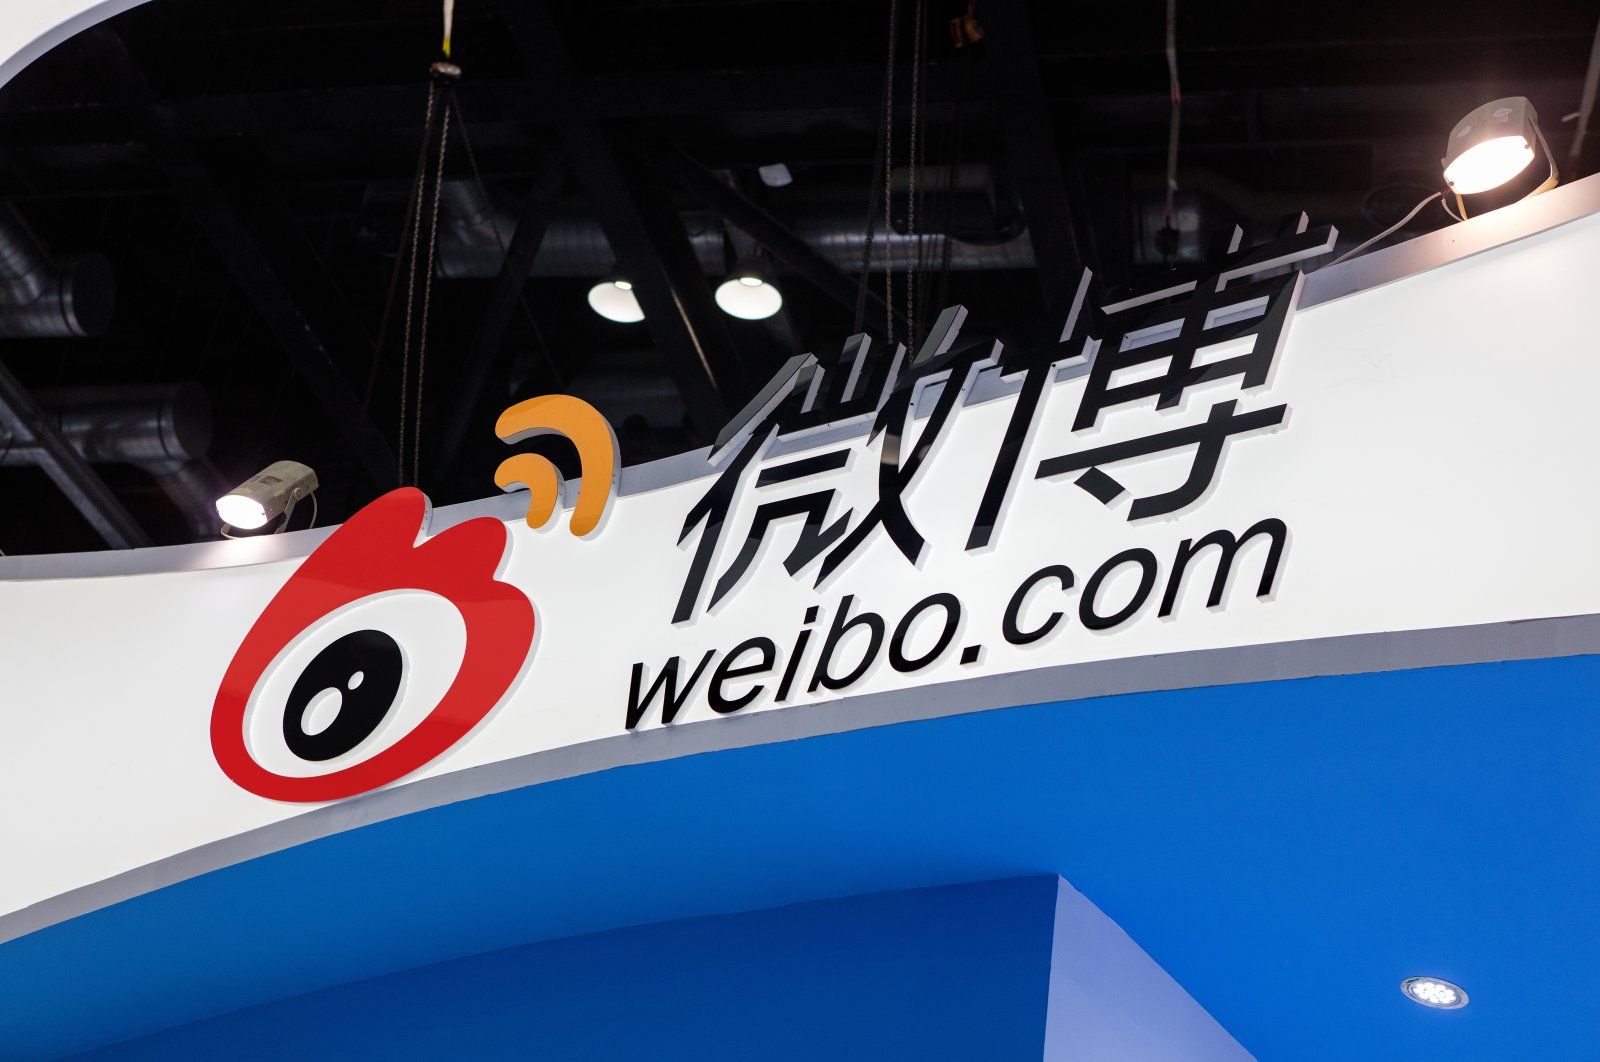 Weibo company sign seen on one of its offices, Beijing, China, April 29, 2017. (Shutterstock Photo)